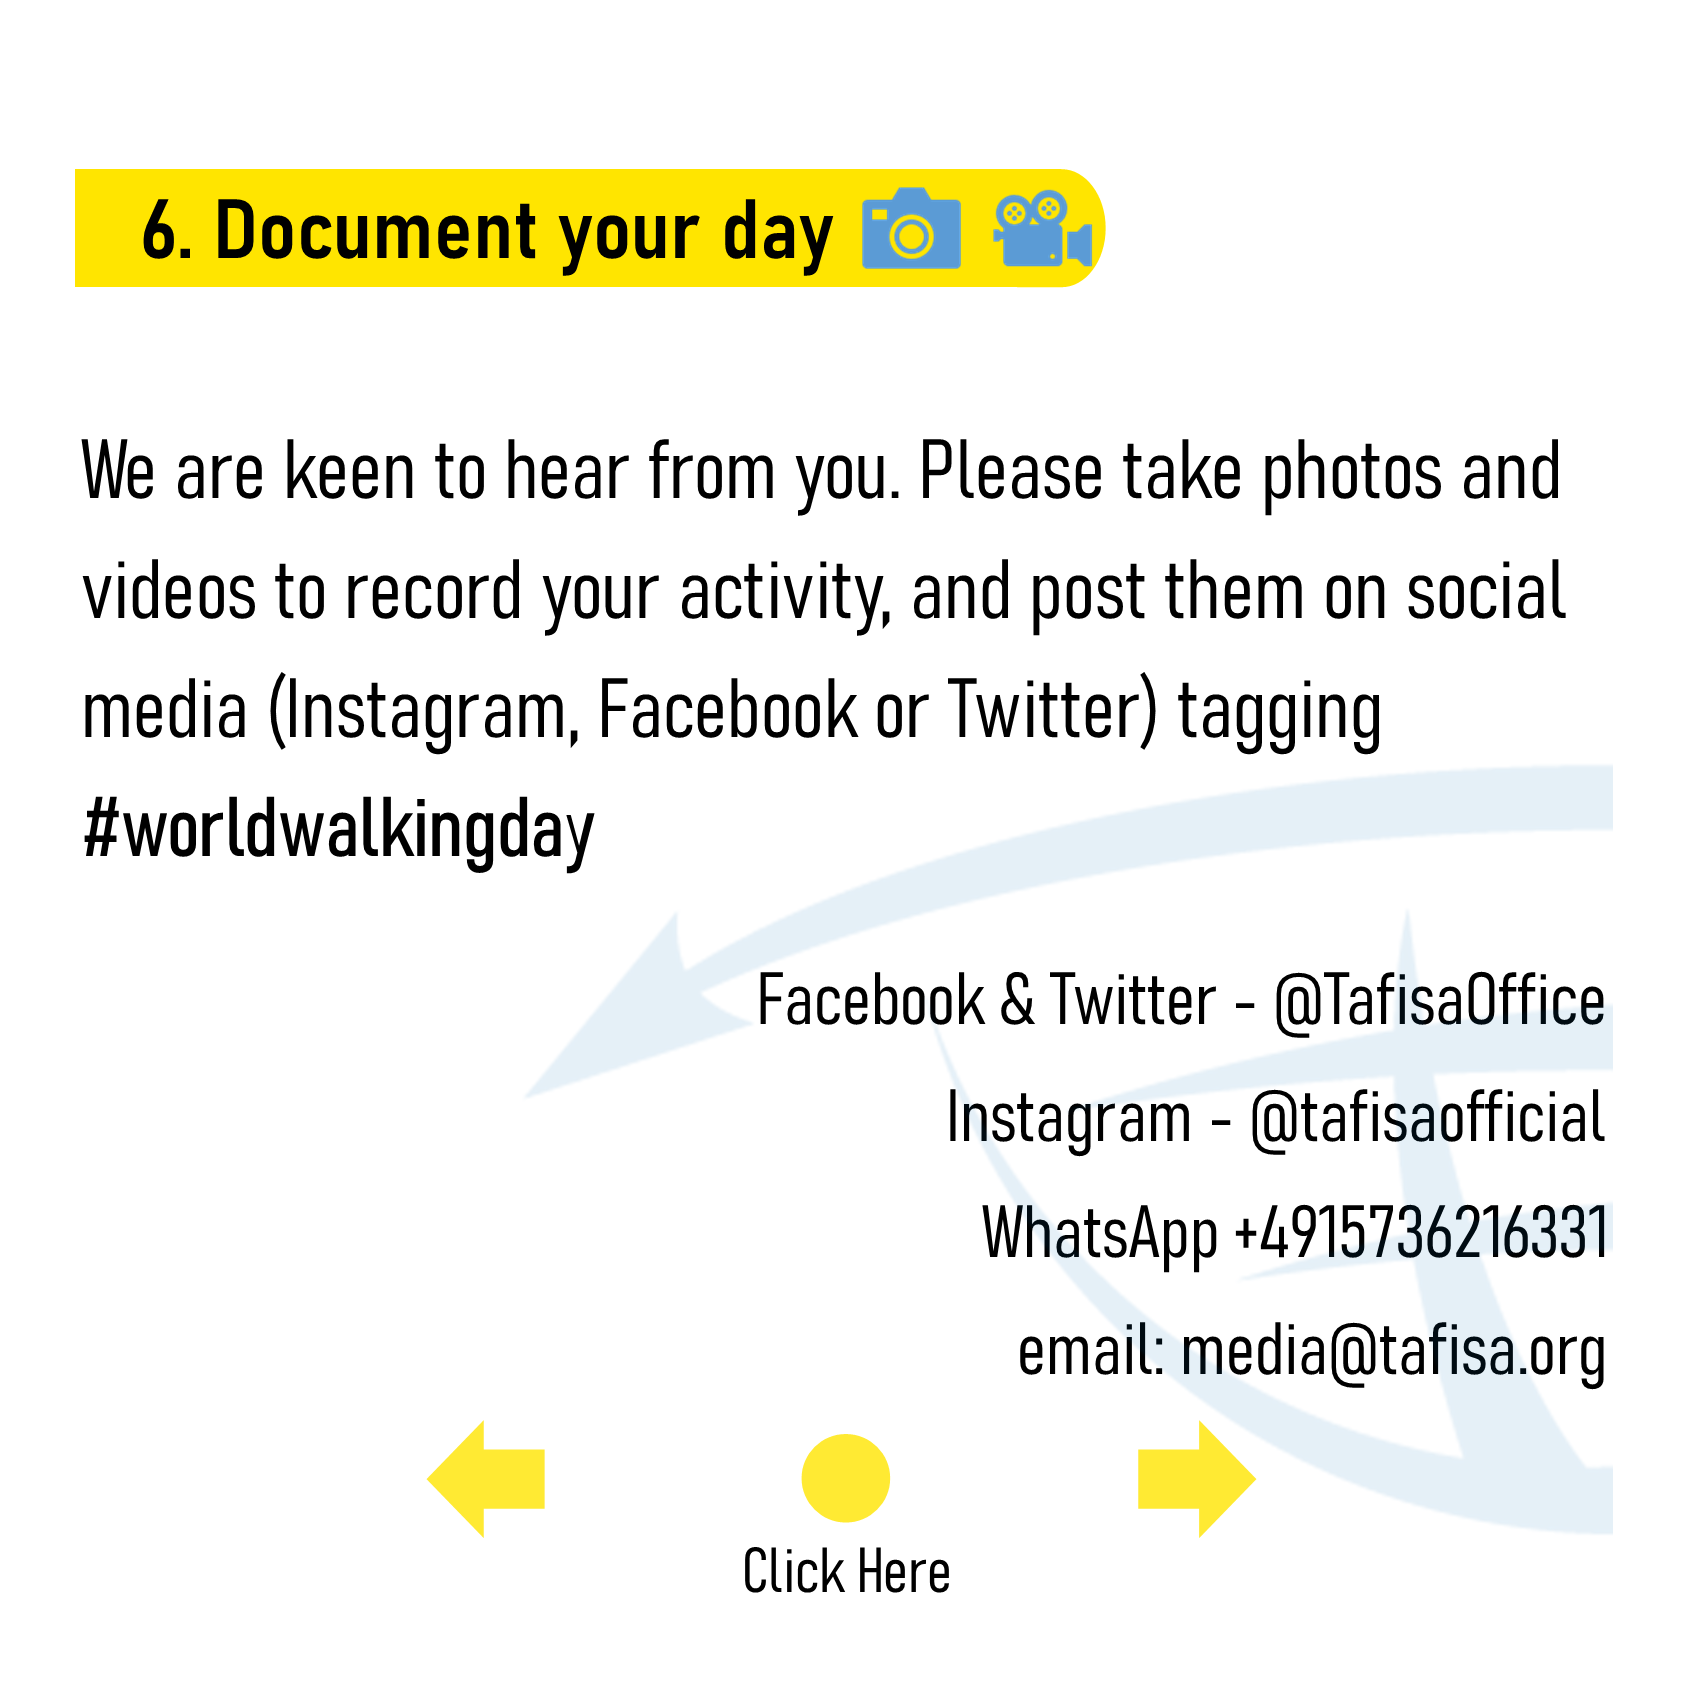 6. Document your day